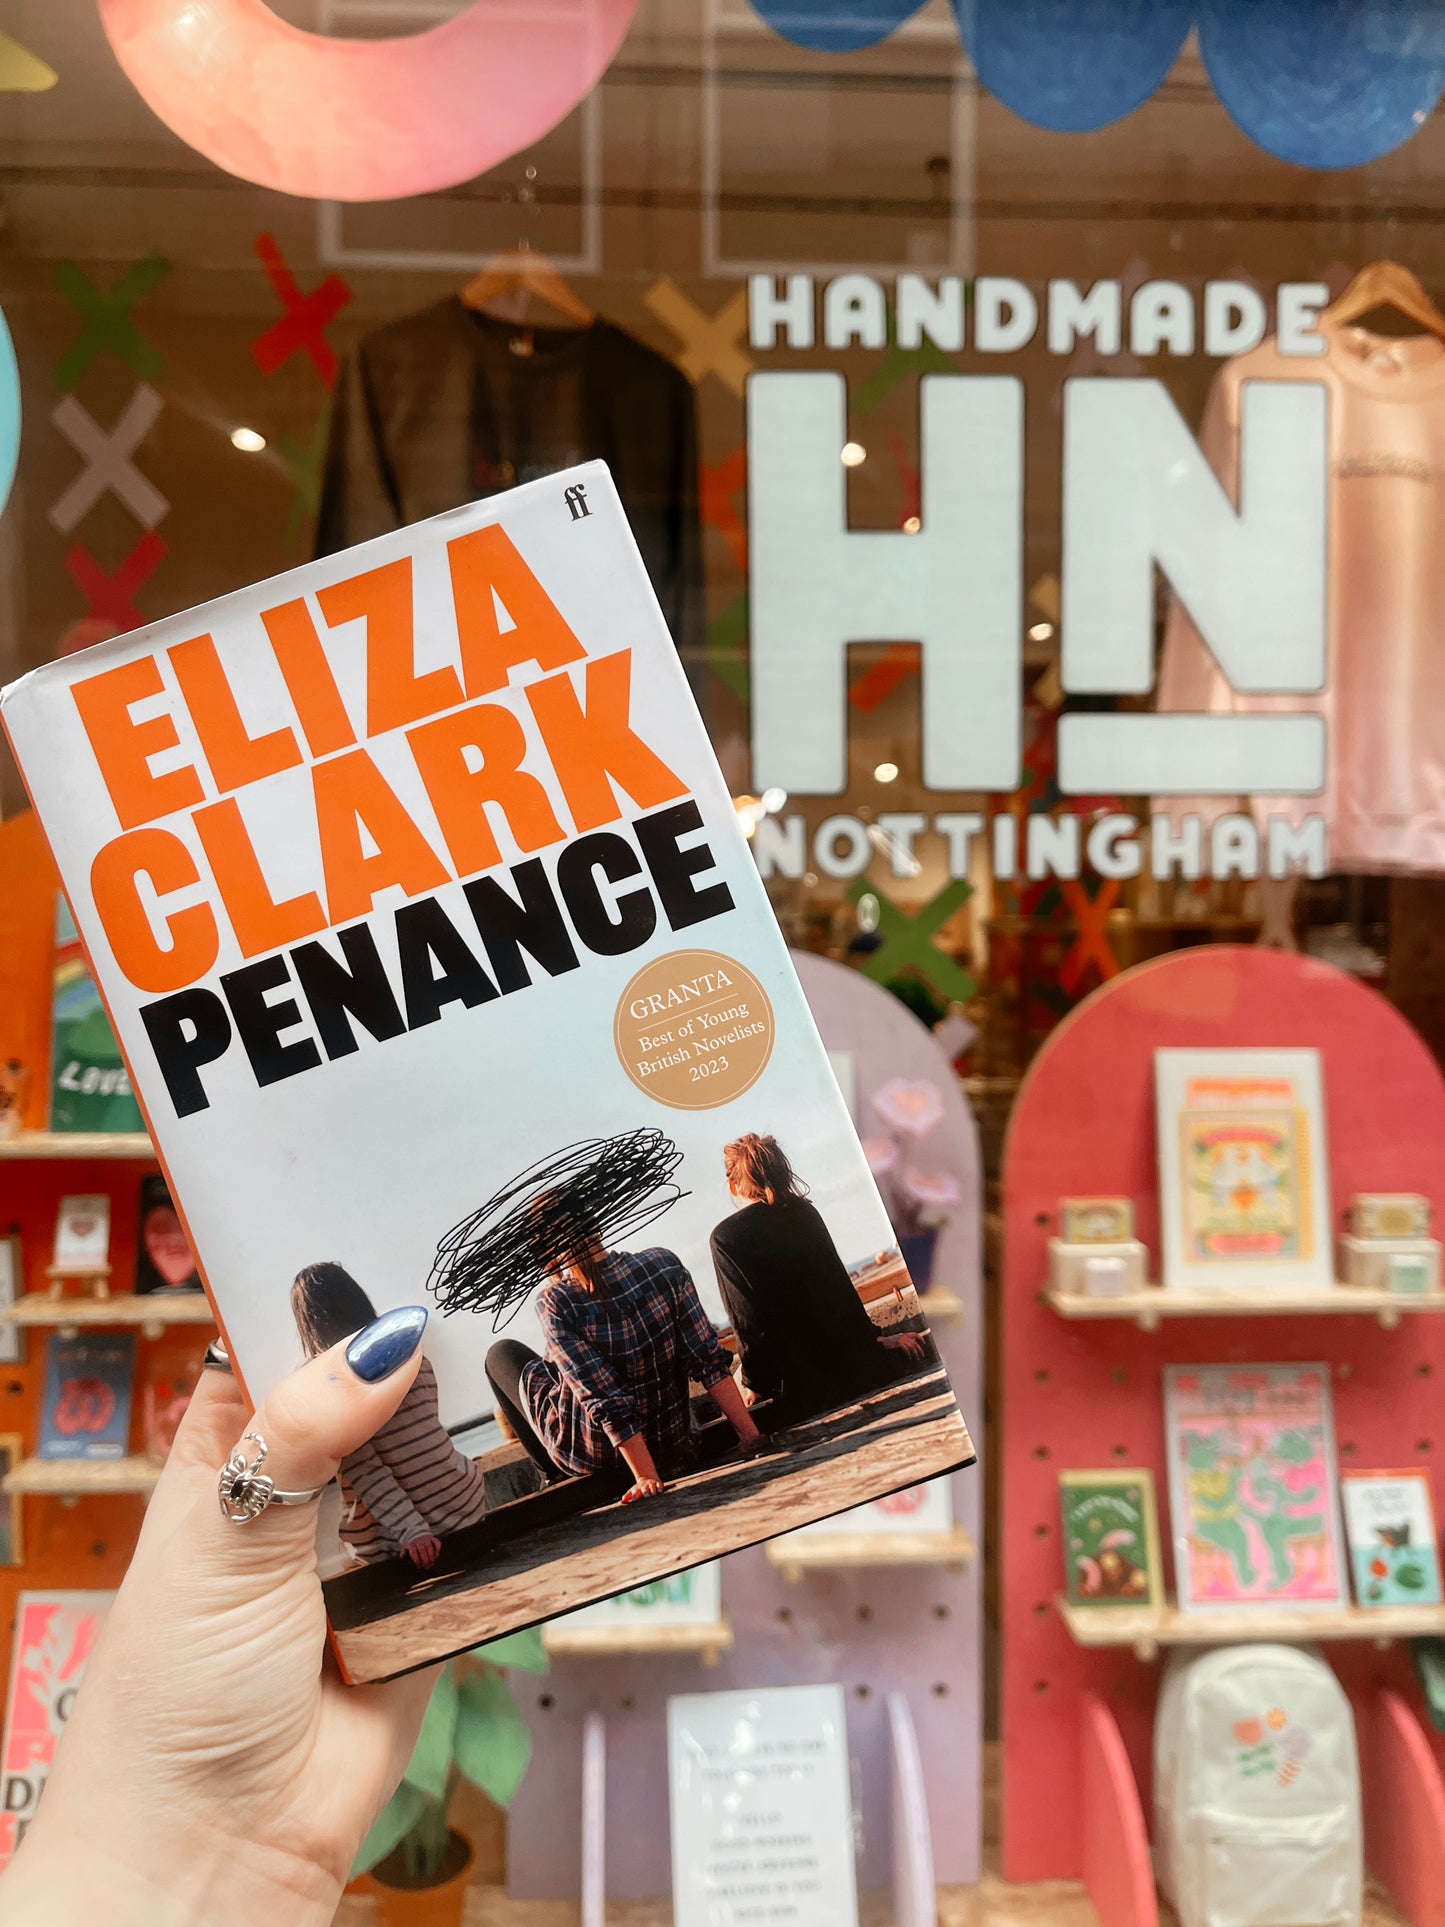 Get Lit Book Club Nottingham - Penance - May 12th - 1pm - 3pm